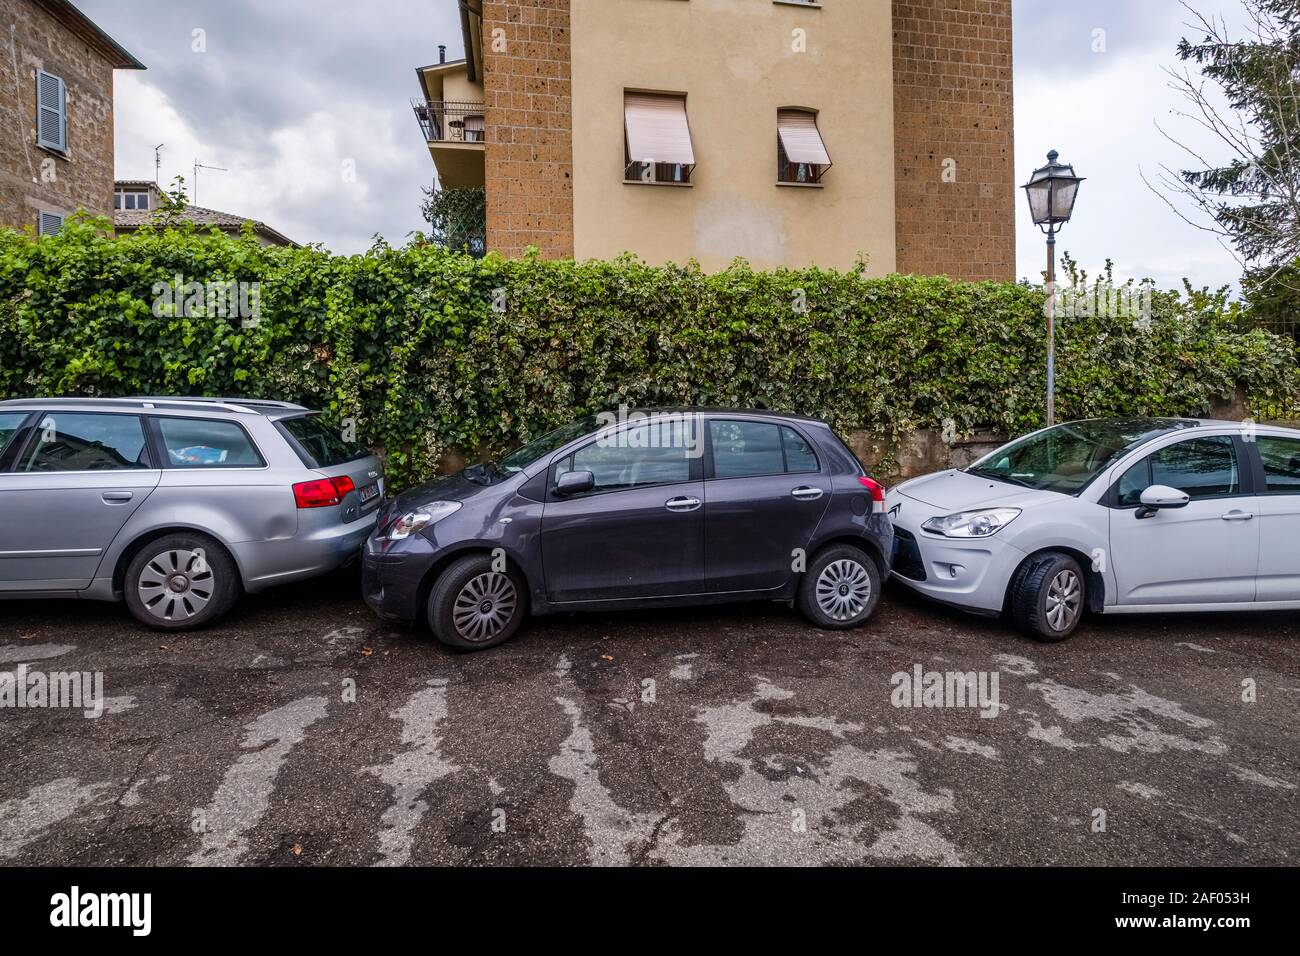 A black car blocked between two othe cars in a parking space at a roadside Stock Photo